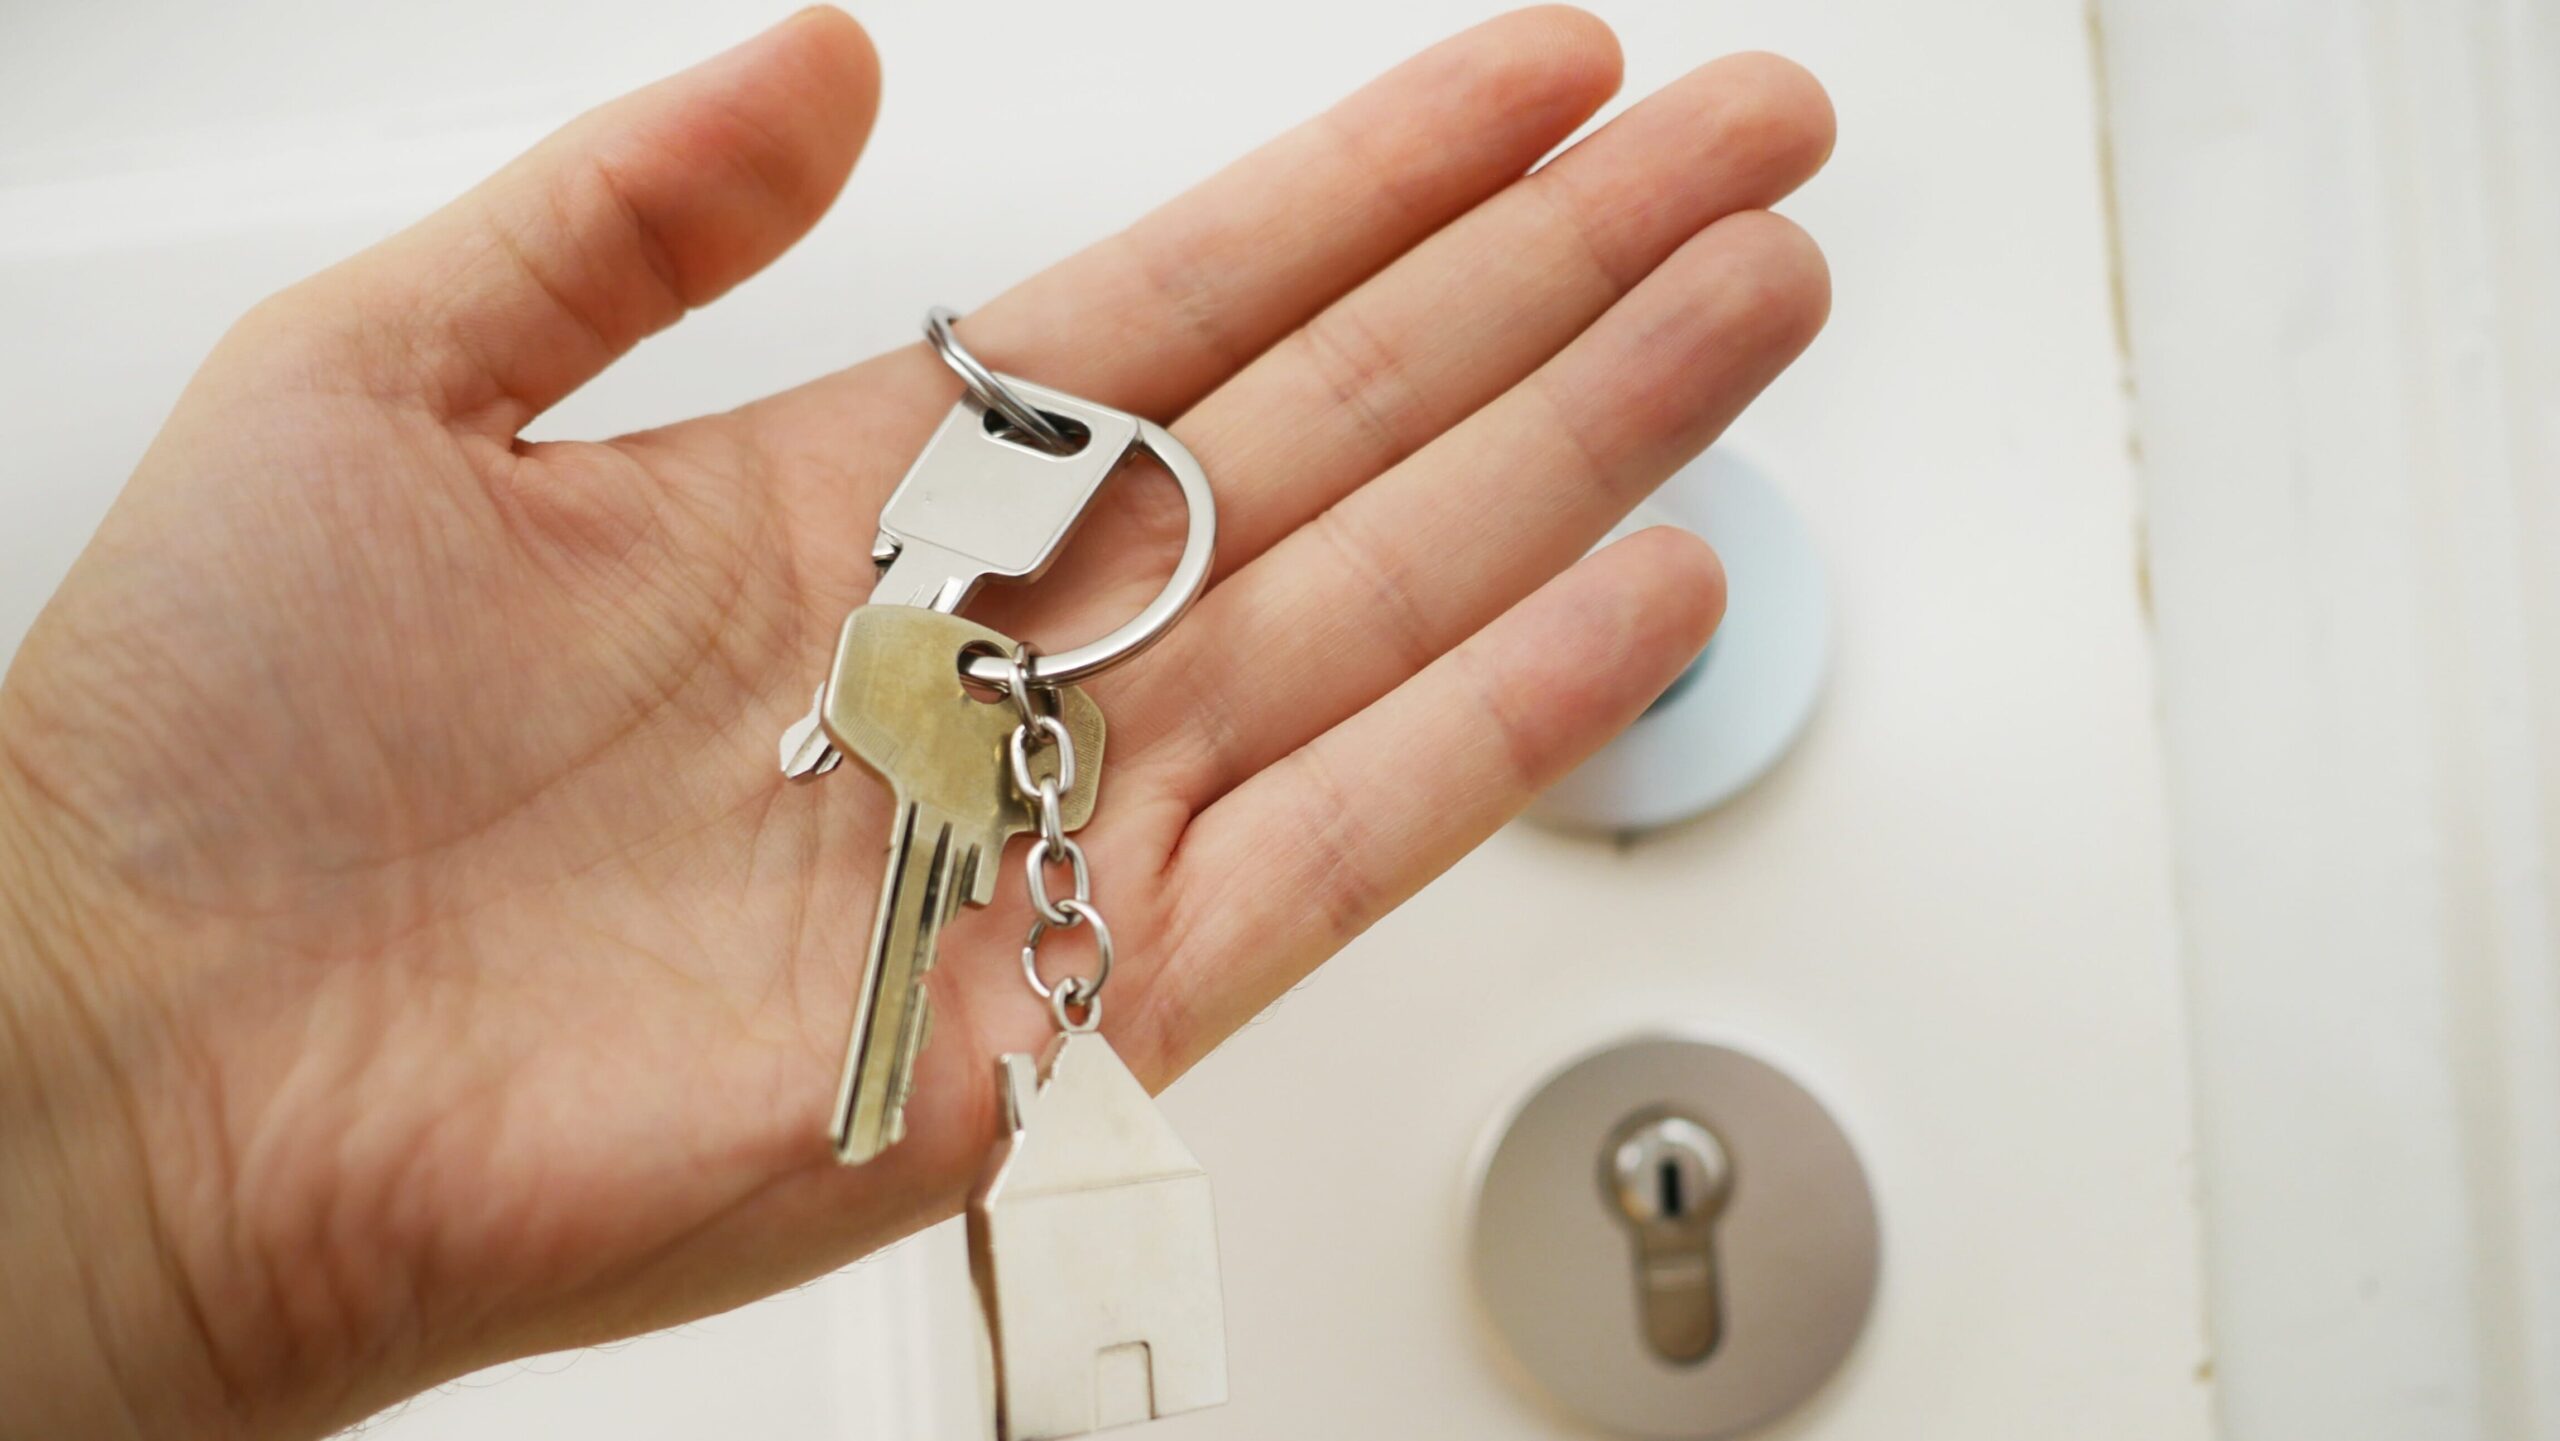 buyers agent commission-a palm of hand holding key chain, hoa closing documents